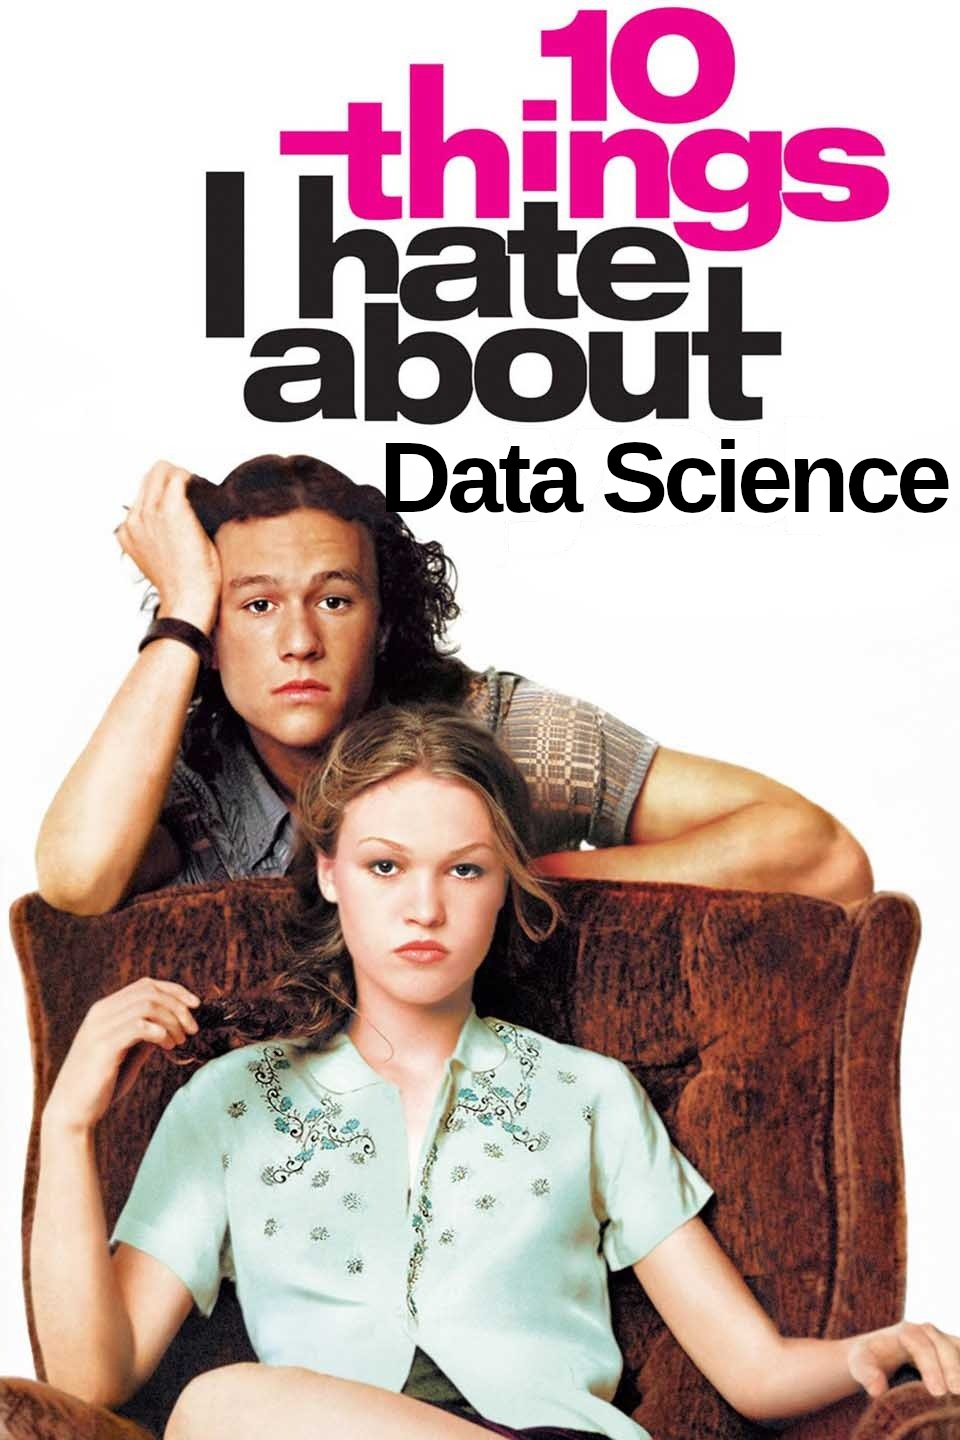 Ten Things I Hate About Data Science